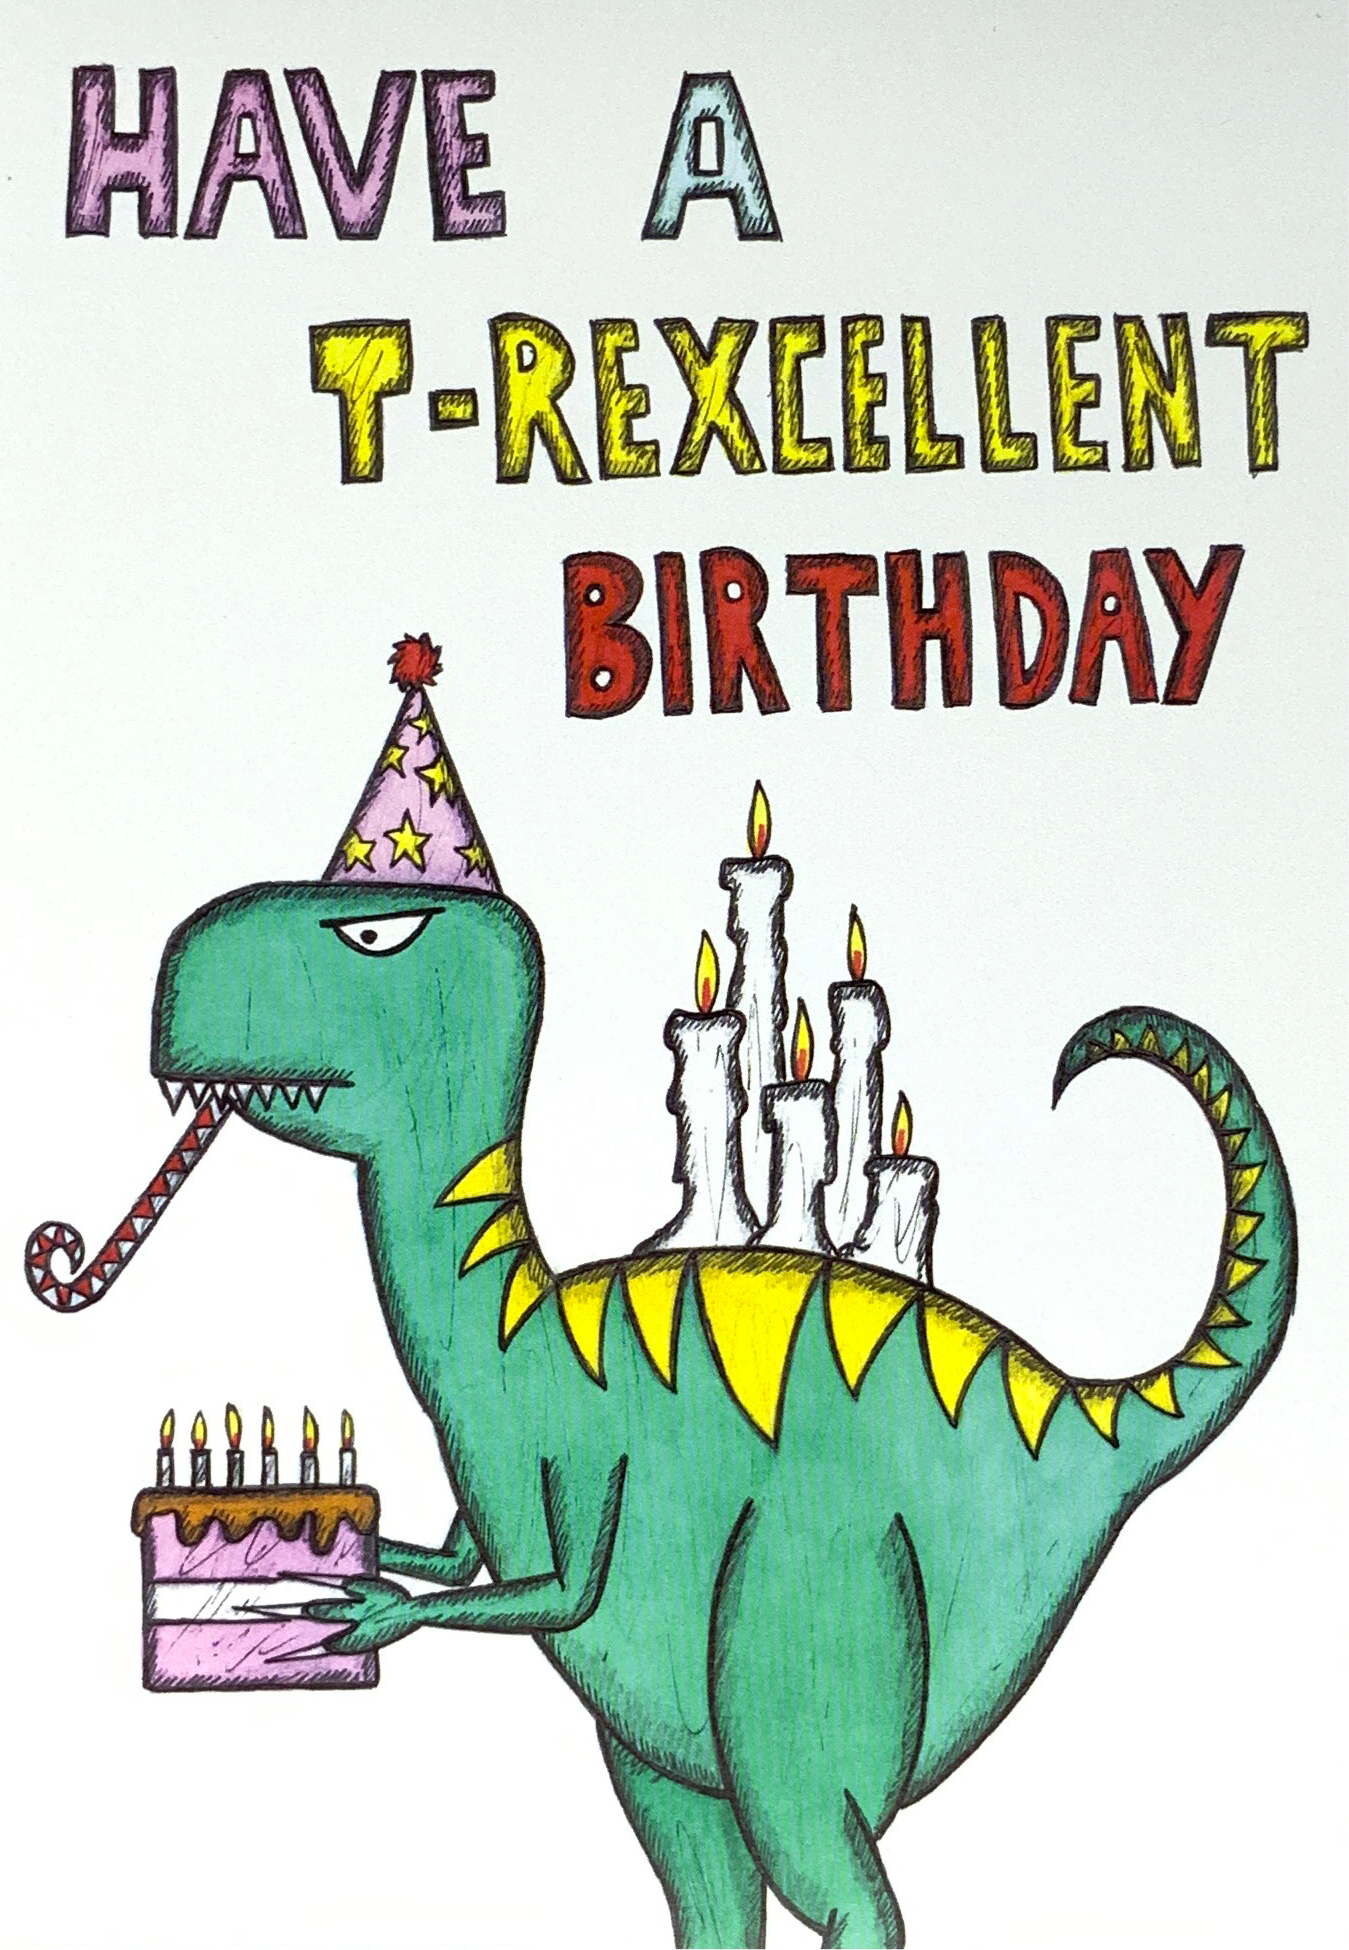 Dublin Card Company - Have A T-Rexcellent Birthday